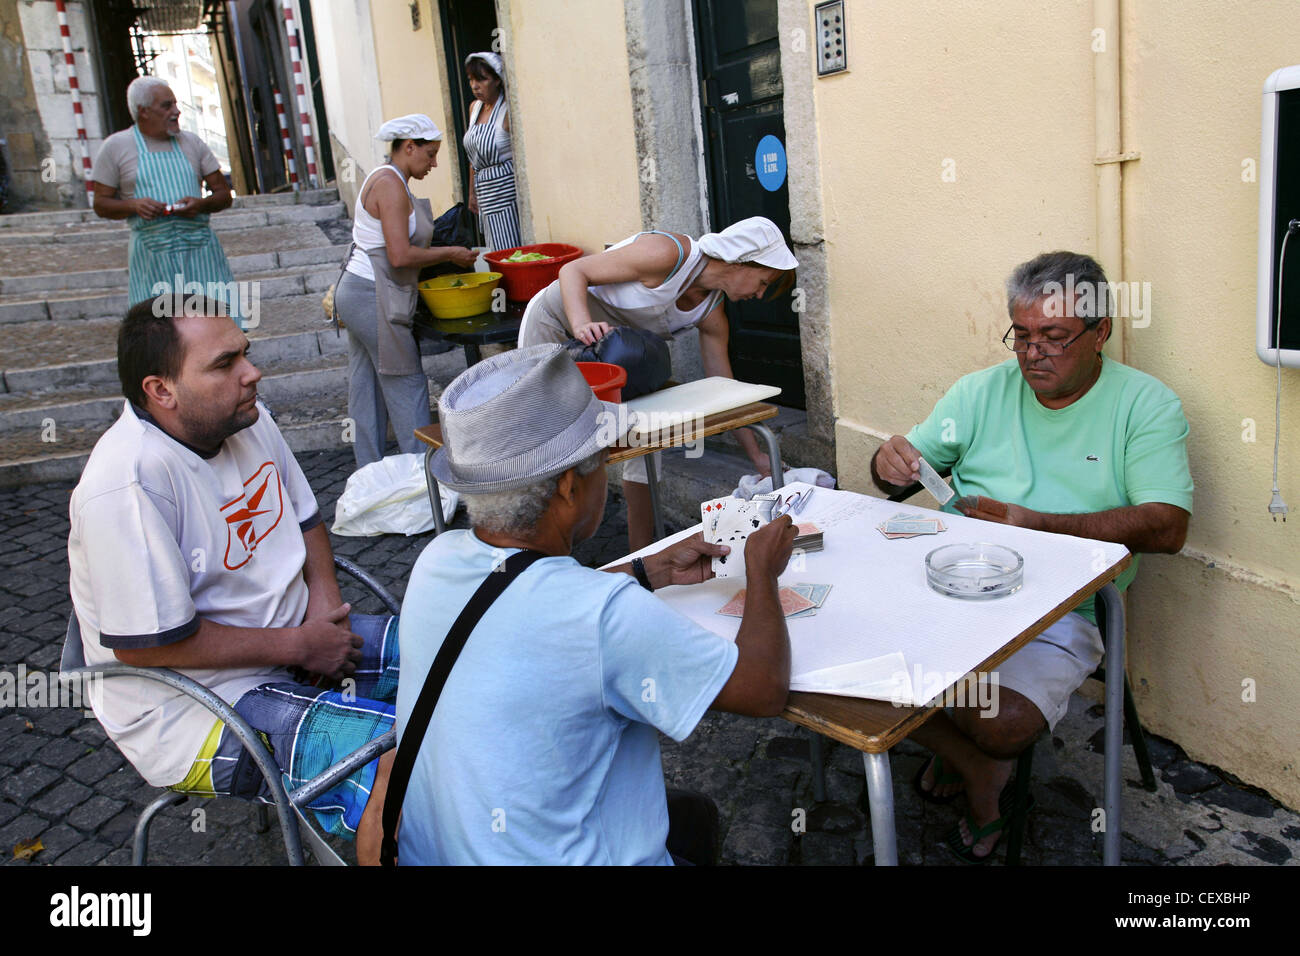 Kitchen Staff and Locals in Alfama District, game of cards, Lisbon, Portugal Stock Photo